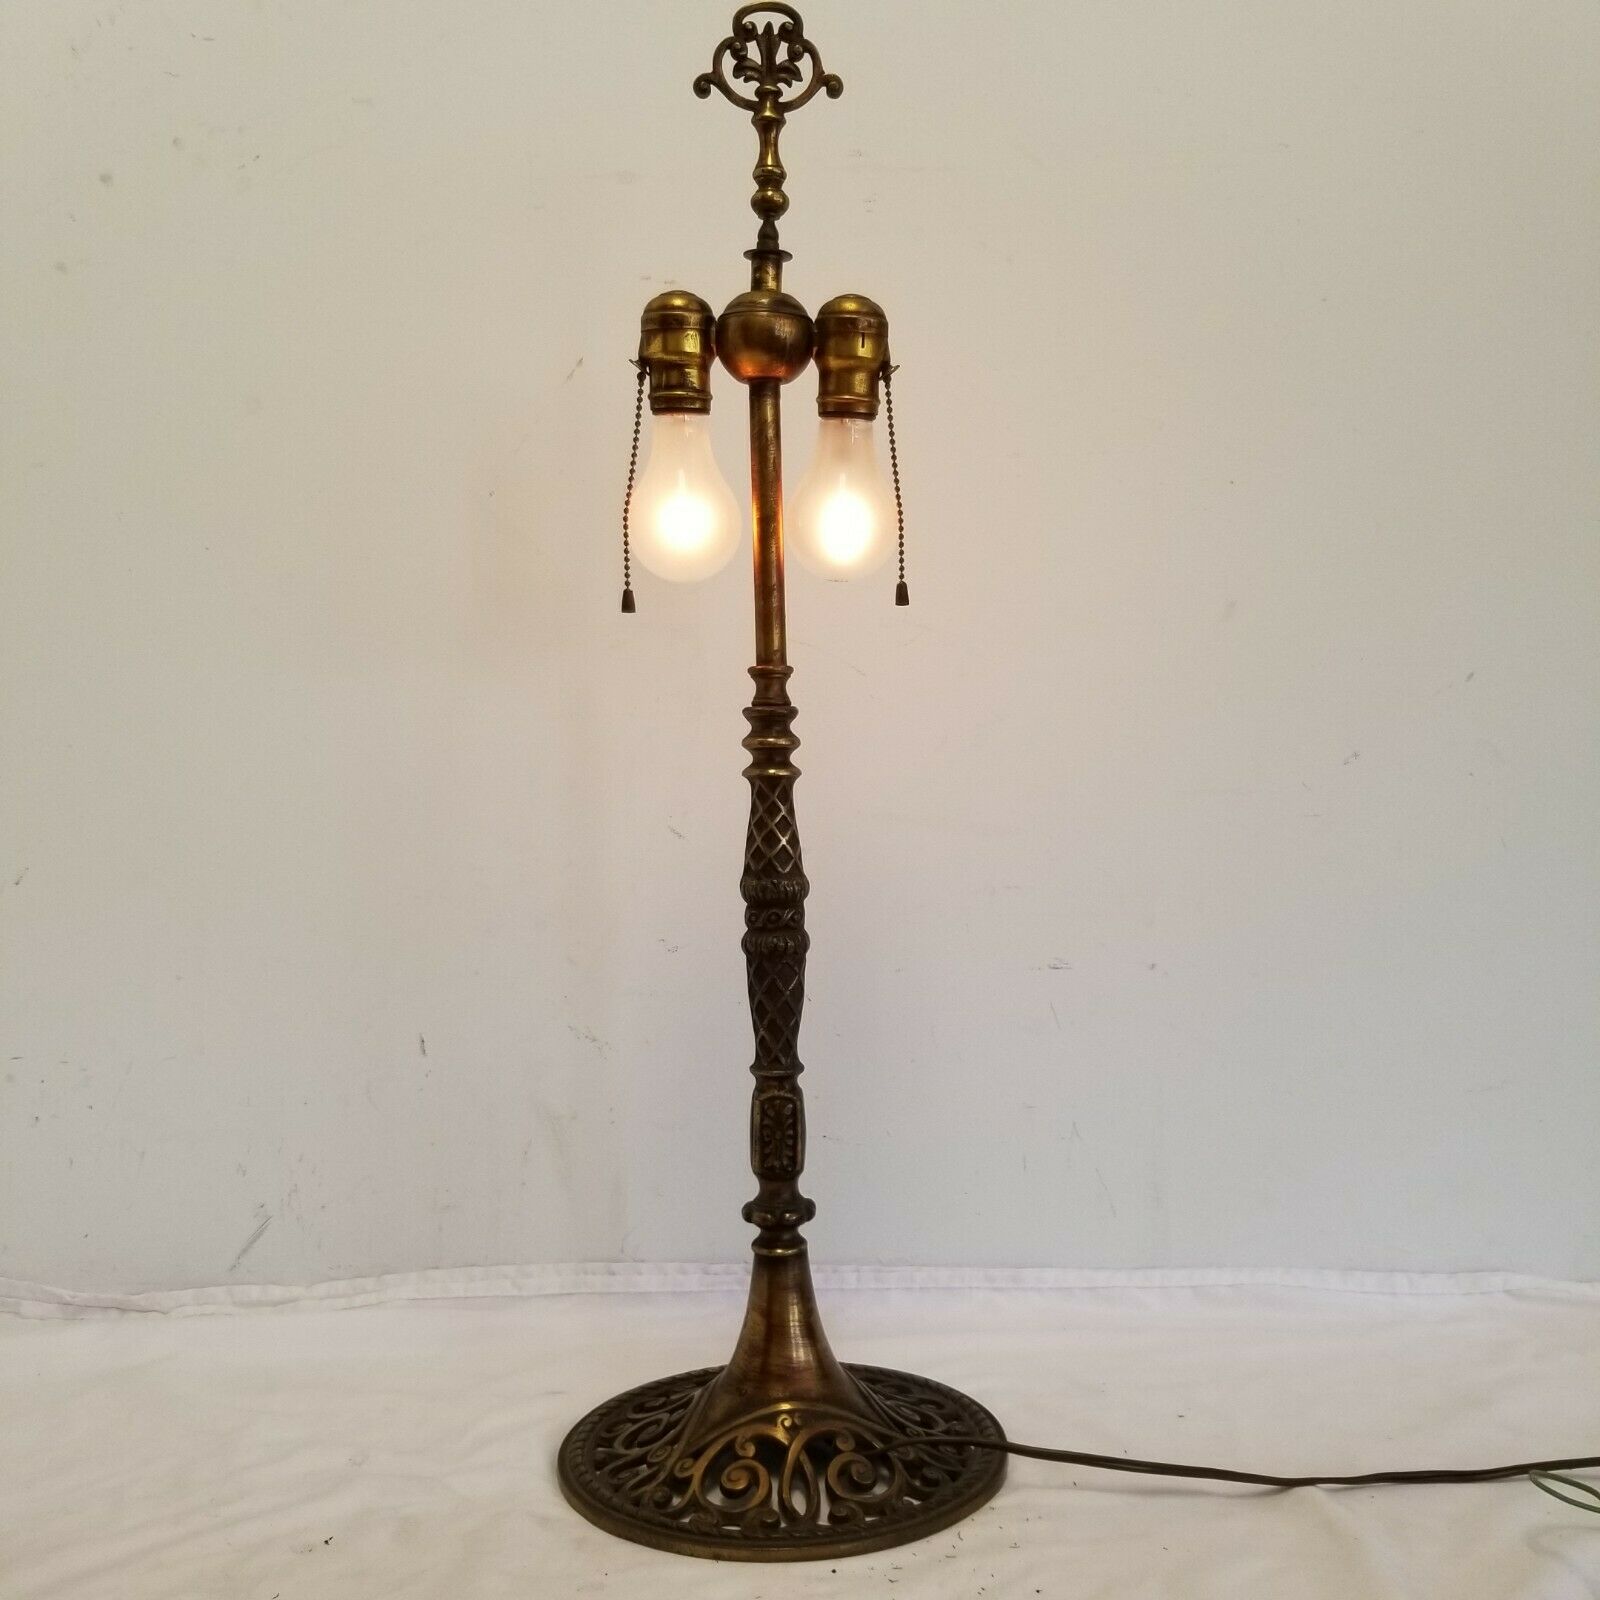 Antique Tall Bronzed Cast Iron Table Lamp, Benjamin Double Socket